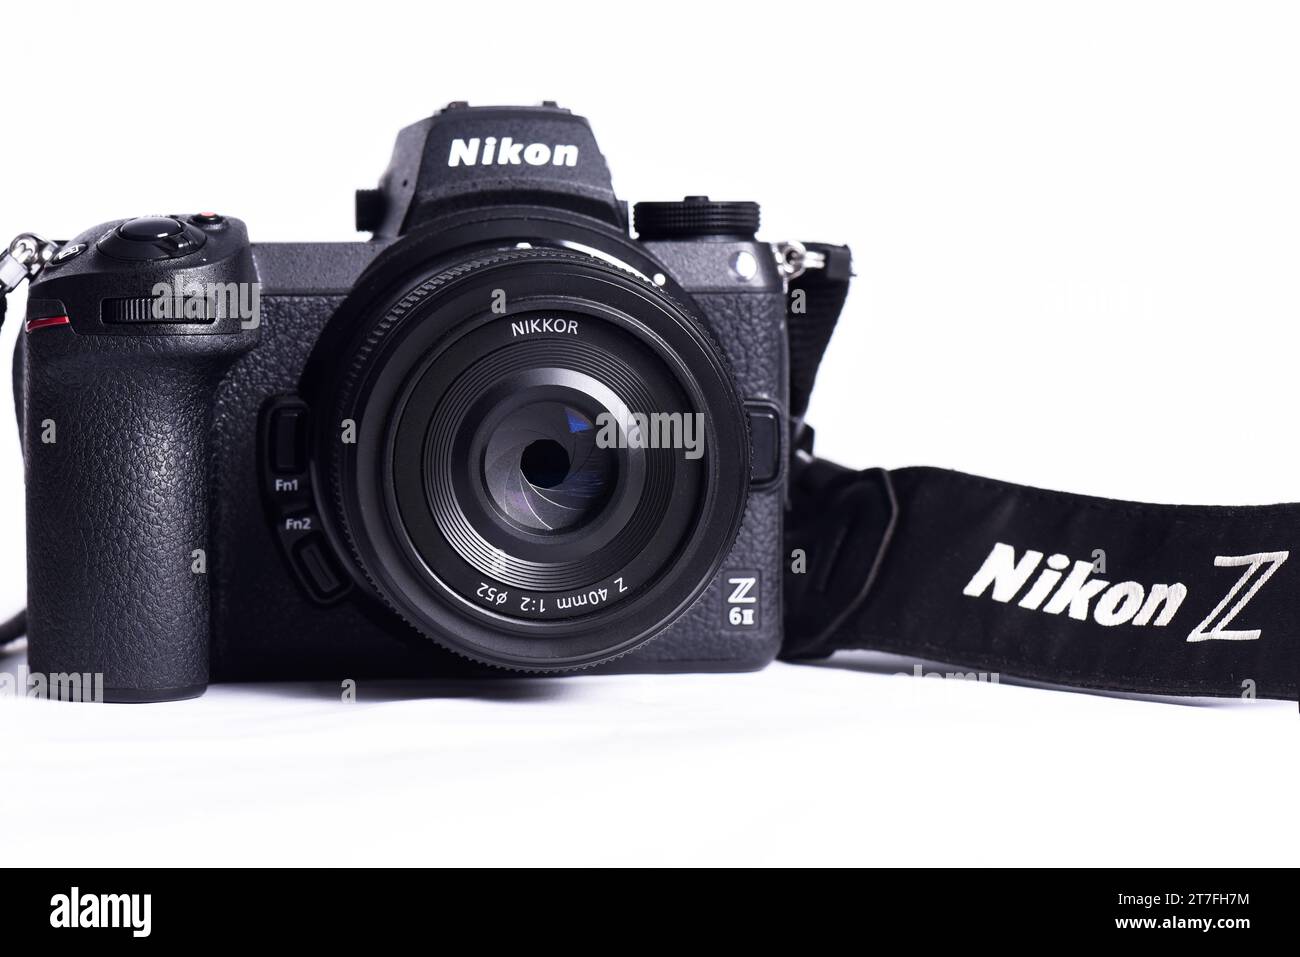 Nikon Z6 II (version 2) camera photograph confrontation and competition between cameras. White background. The best mirrorless cameras from top brands Stock Photo